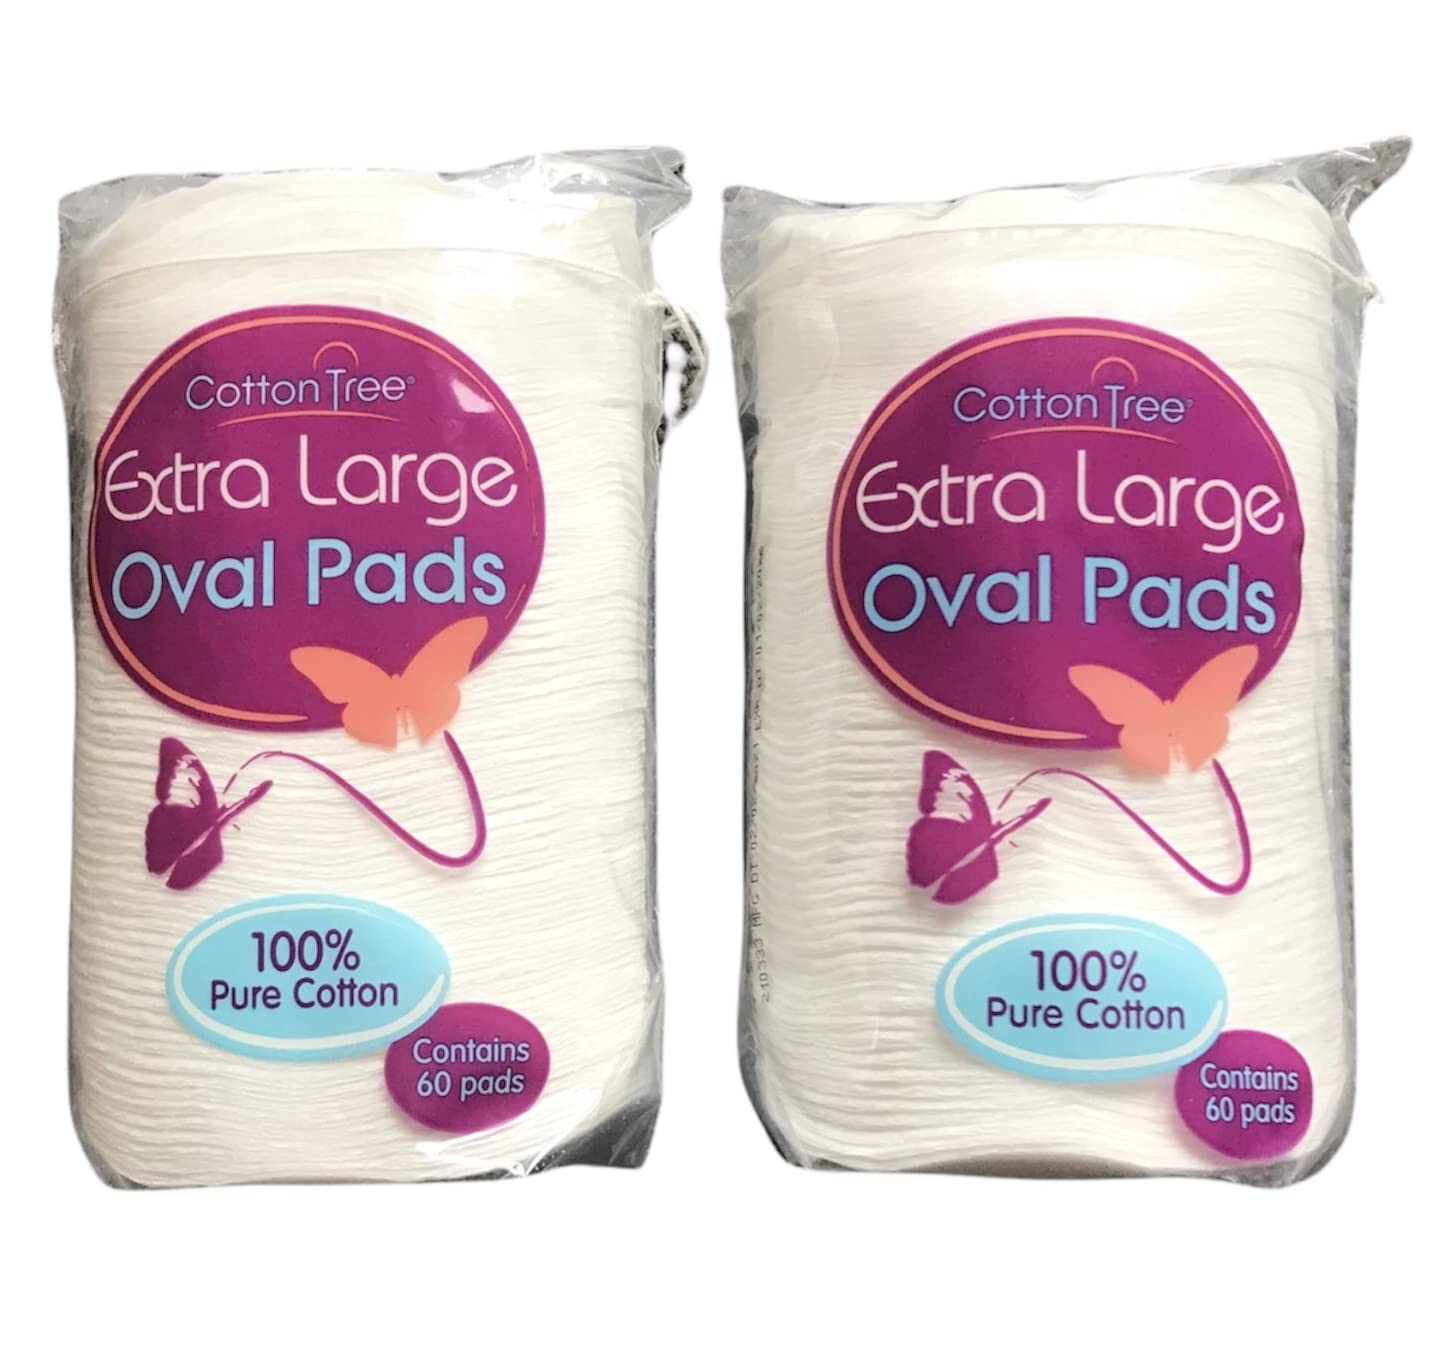 Cotton Tree® Extra Large Oval Pads 60 Pack x 2